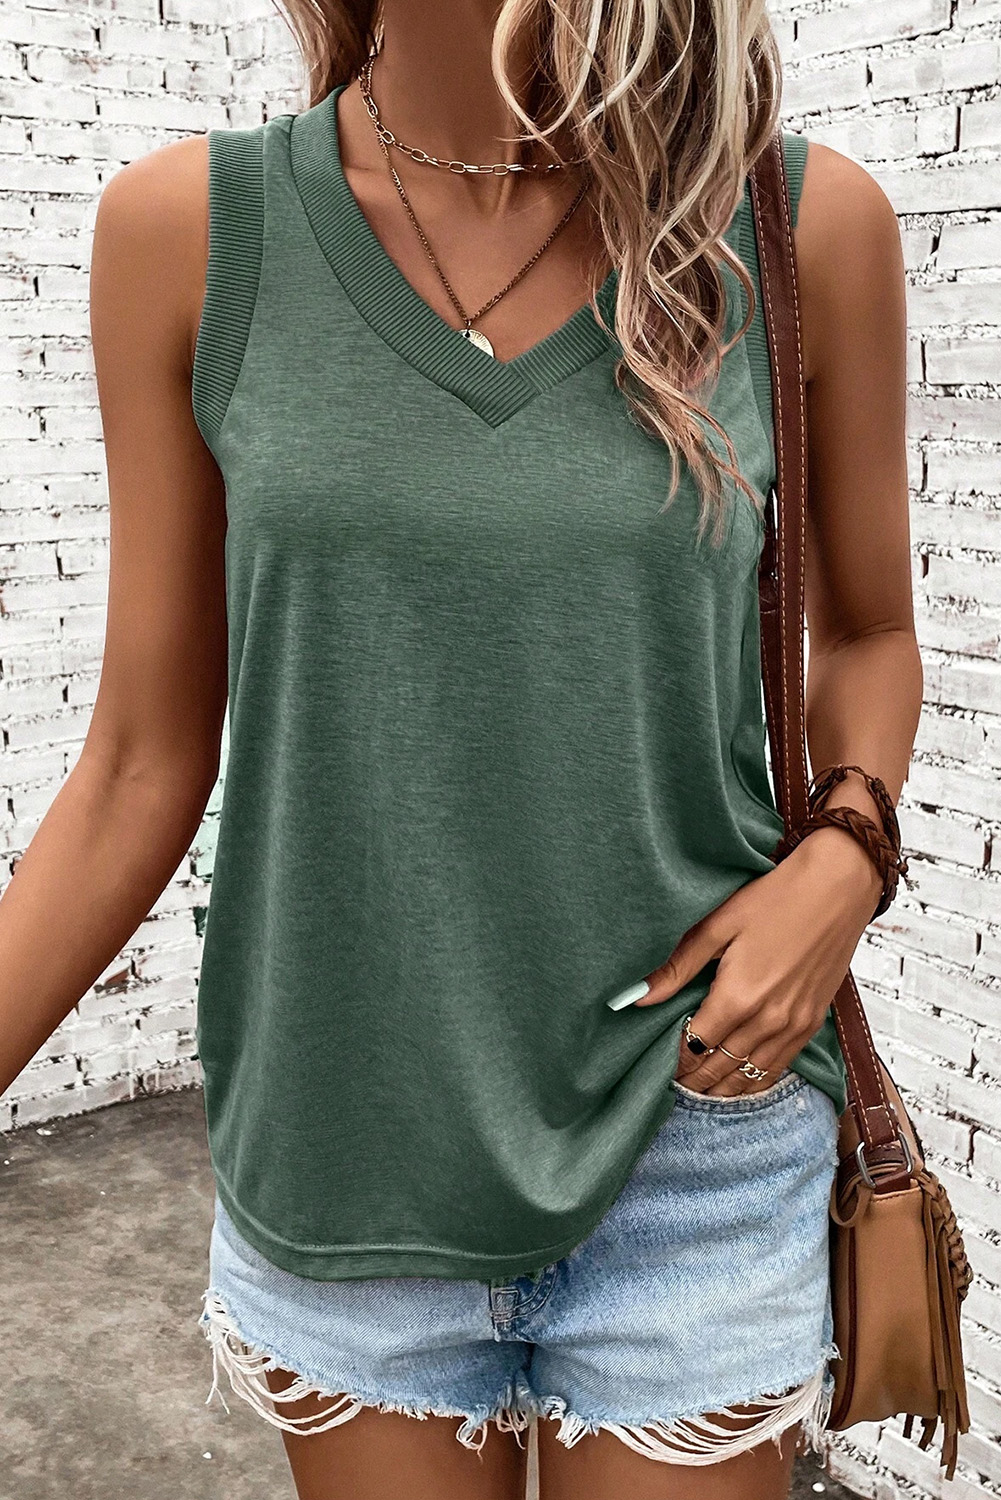 Shewin Wholesale Dropshipping Mist Green Contrast Trim V-Neck Loose Fit TANK TOP